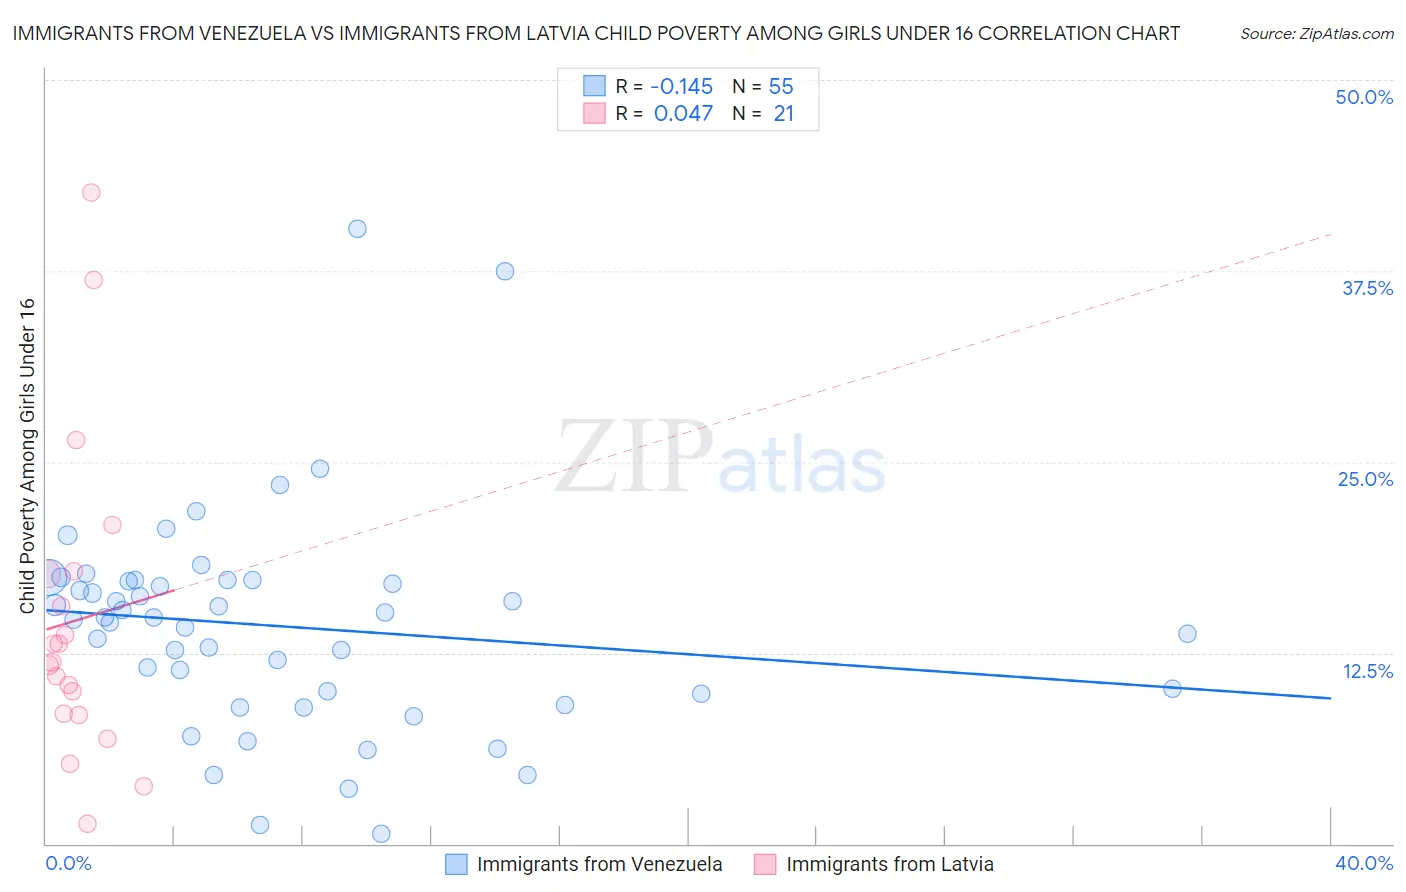 Immigrants from Venezuela vs Immigrants from Latvia Child Poverty Among Girls Under 16